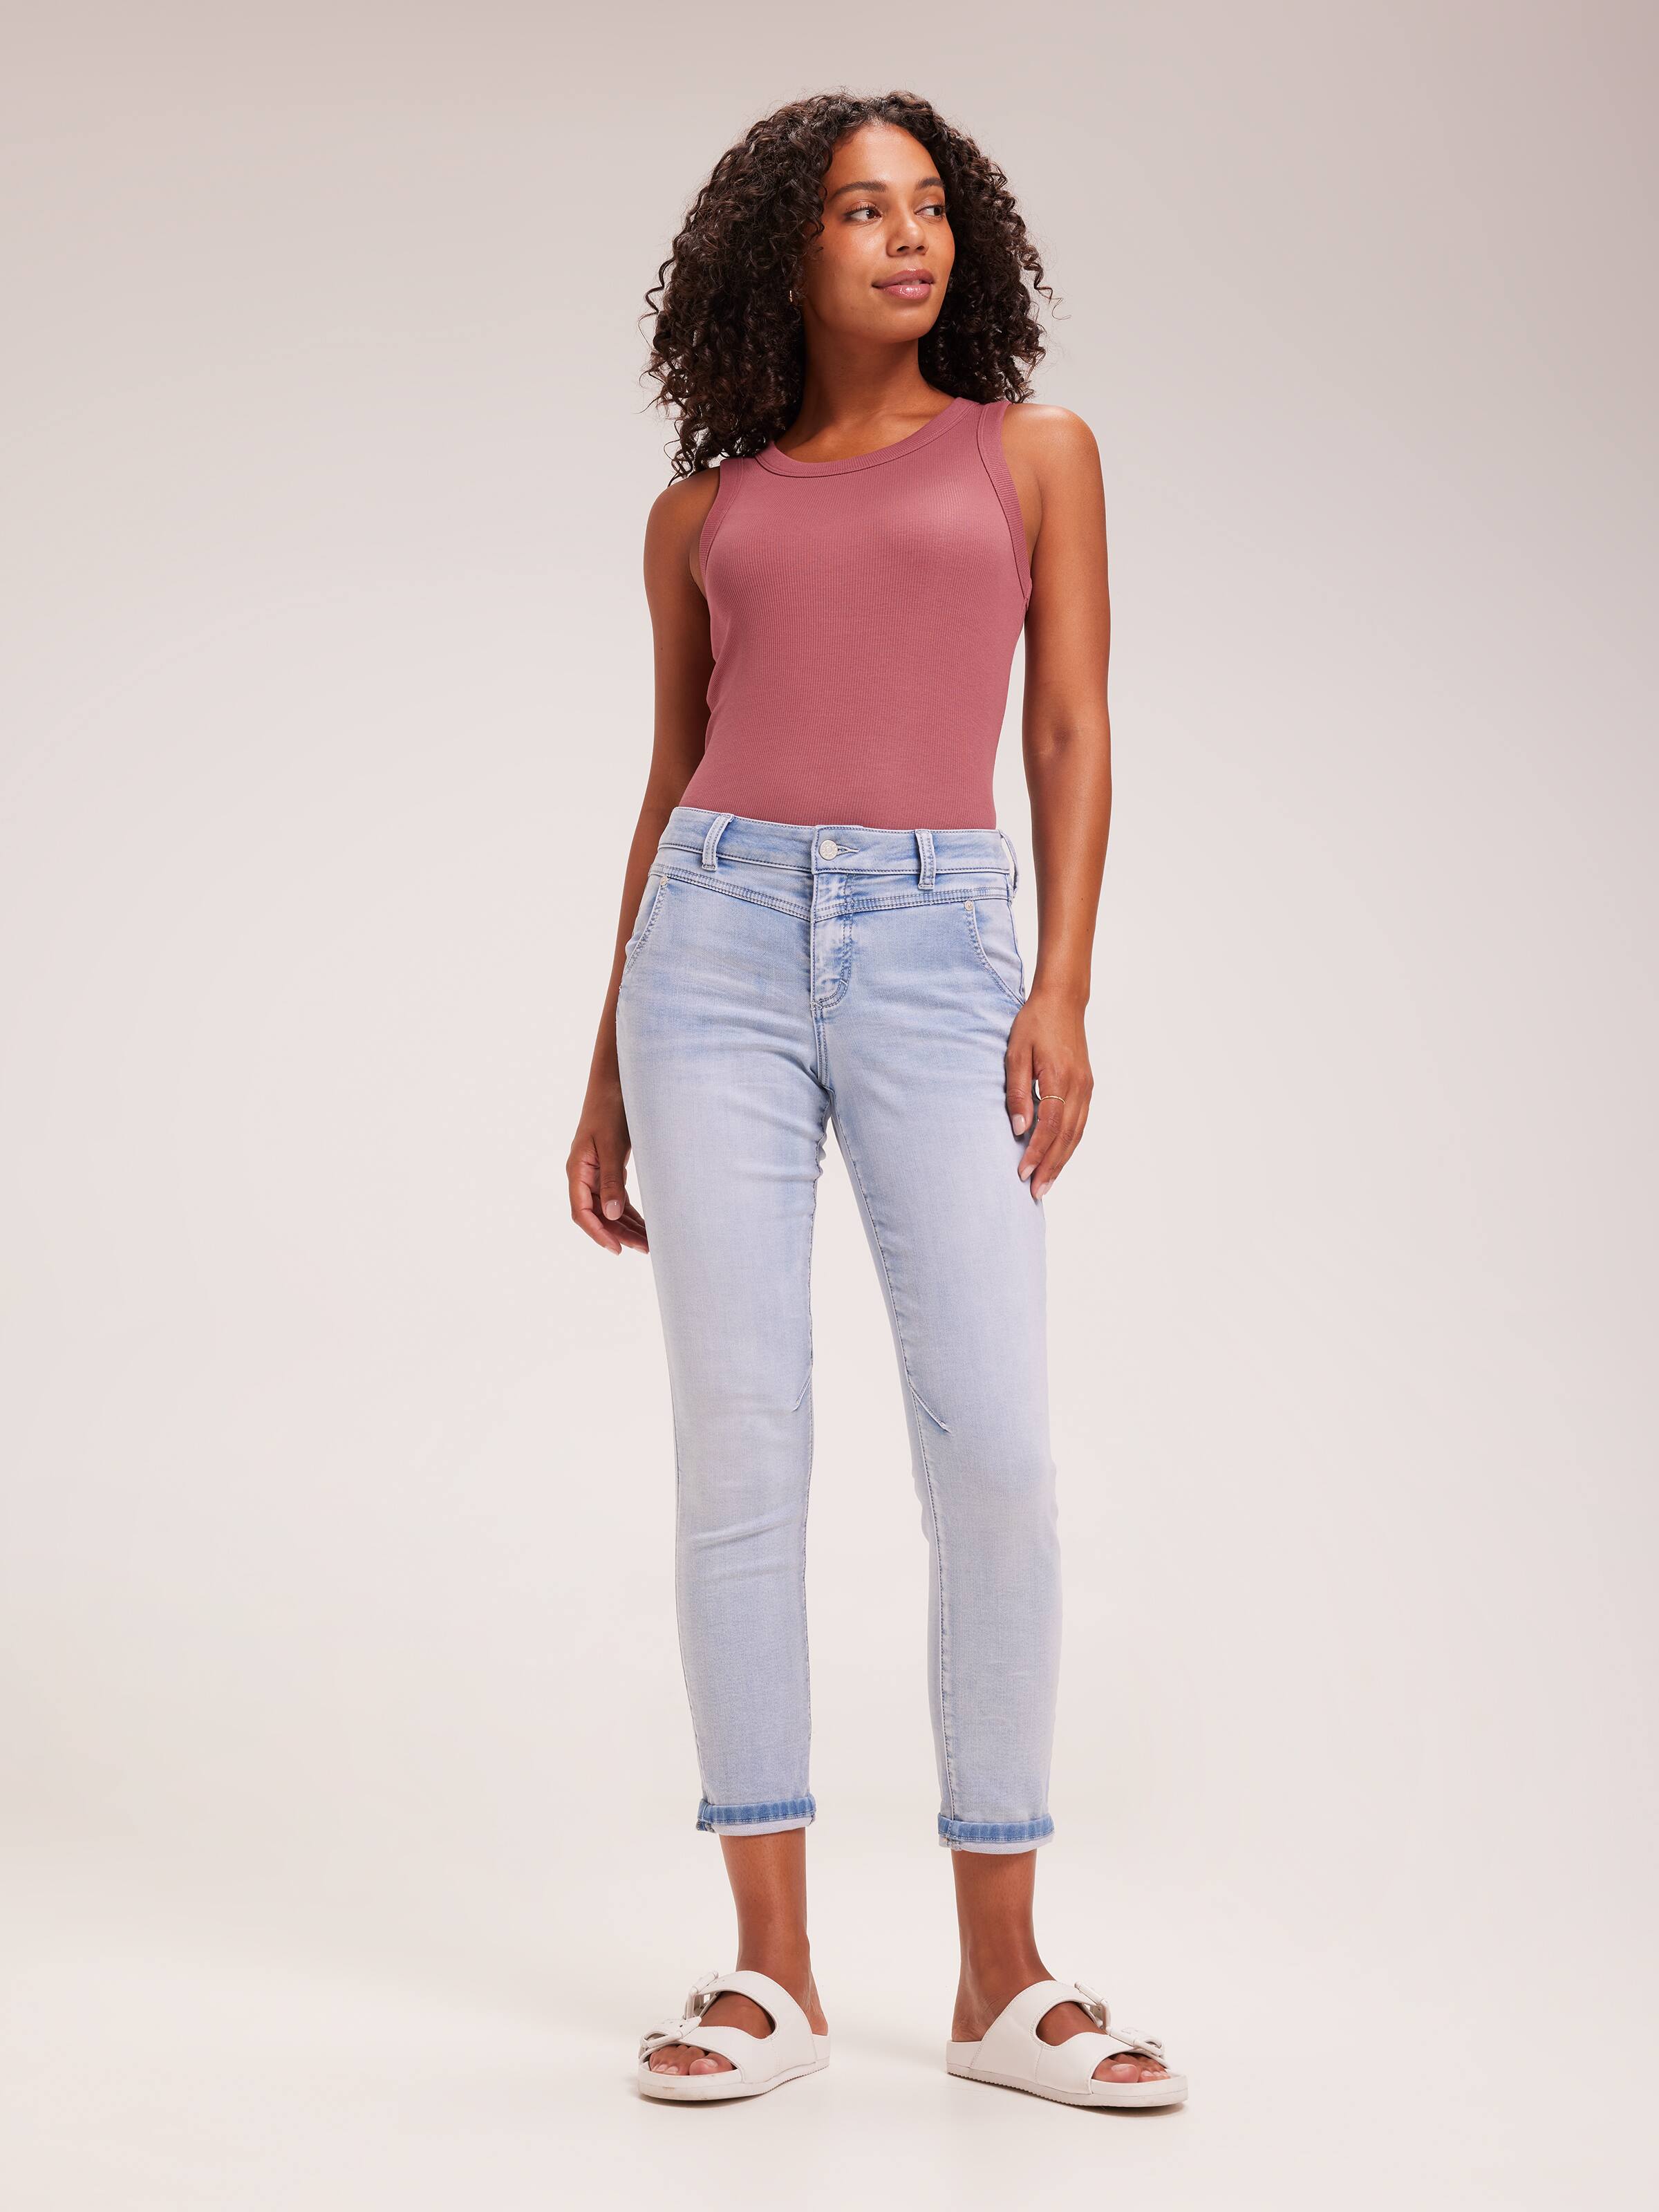 PERFECT FASHION Boyfriend Women Light Blue Jeans - Buy PERFECT FASHION  Boyfriend Women Light Blue Jeans Online at Best Prices in India